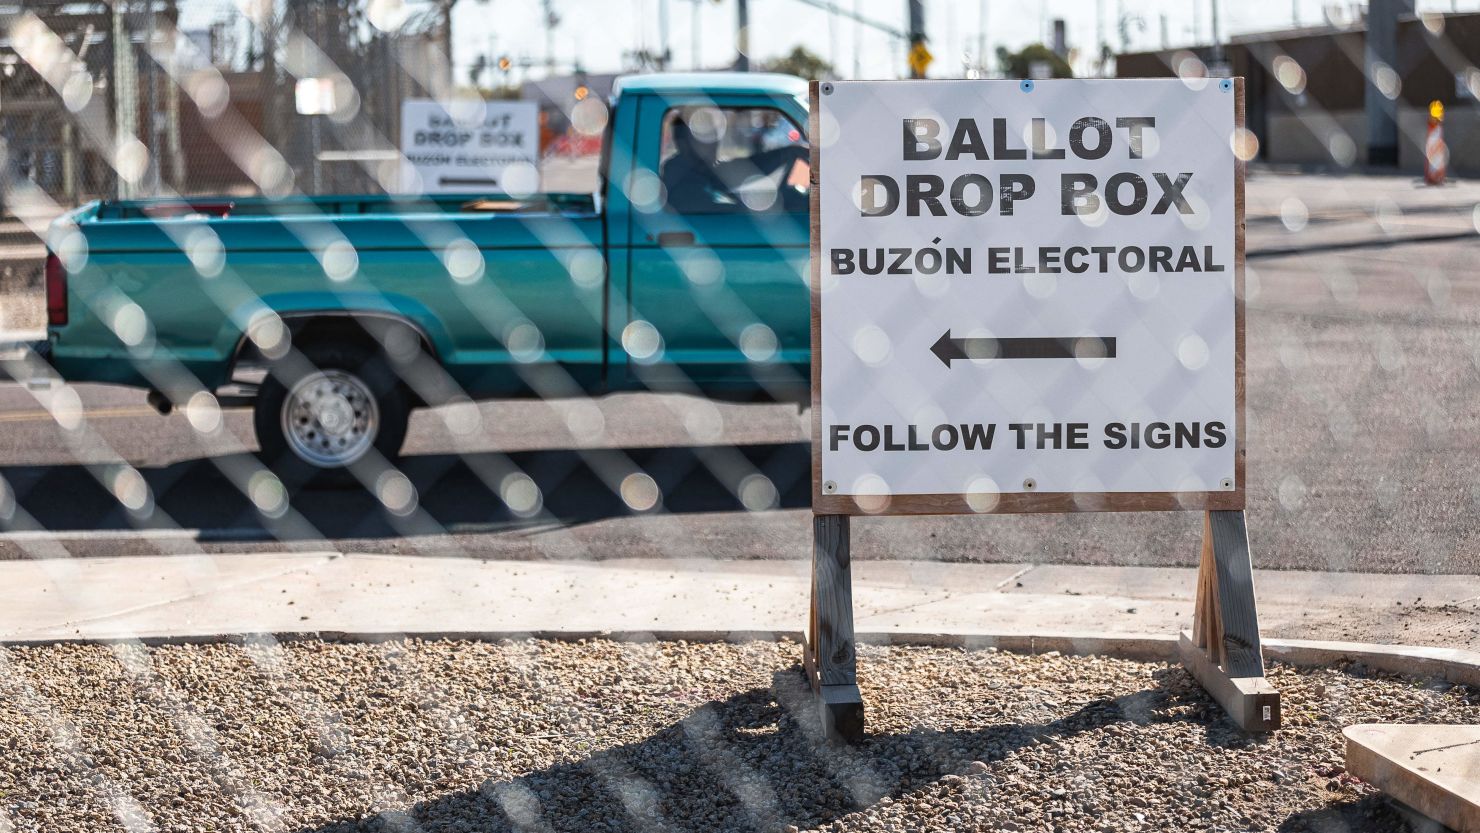 Fences surround the Maricopa County Tabulation and Elections Center (MCTEC) in Phoenix, Arizona, on October 25, 2022, to help prevent incidents and pressure on voters at the ballot drop box.